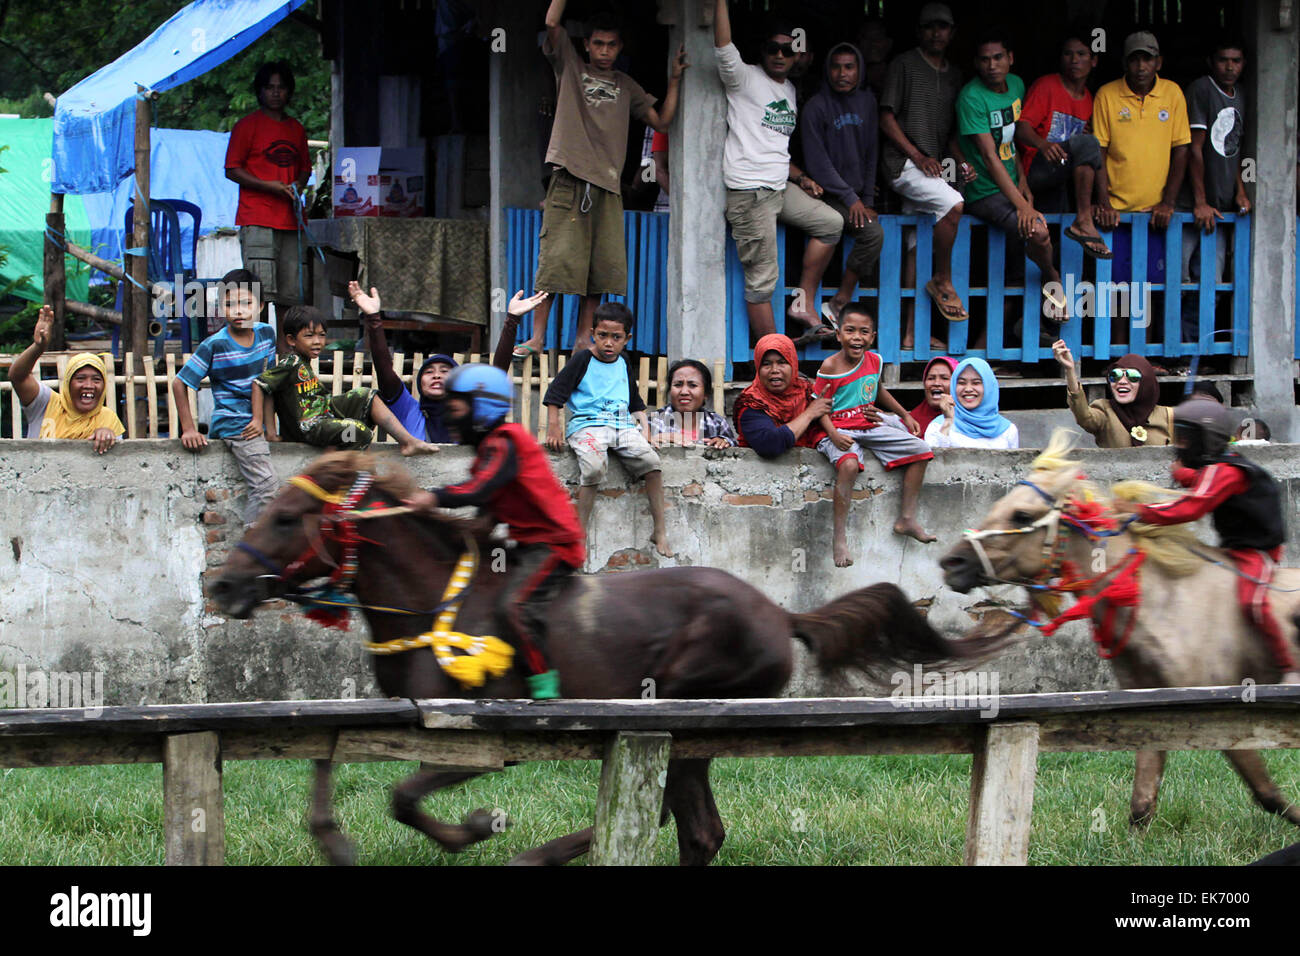 West Nusa Tenggara, Indonesia. 7th Apr, 2015. People cheer during a children horse race at Mount Tambora Festival in Dompu, West Nusa Tenggara, Indonesia, April 7, 2015. Children horse race is a part of the Mount Tambora Festival marking the 200th year of its eruption, which is held from April 5 to April 11. The 1815 explosion of Mount Tambora buried the inhabitants of Sumbawa Island under searing ash, gas and rock, killing an estimated 88,000 people. Credit:  Dwi Aqilasya/Xinhua/Alamy Live News Stock Photo